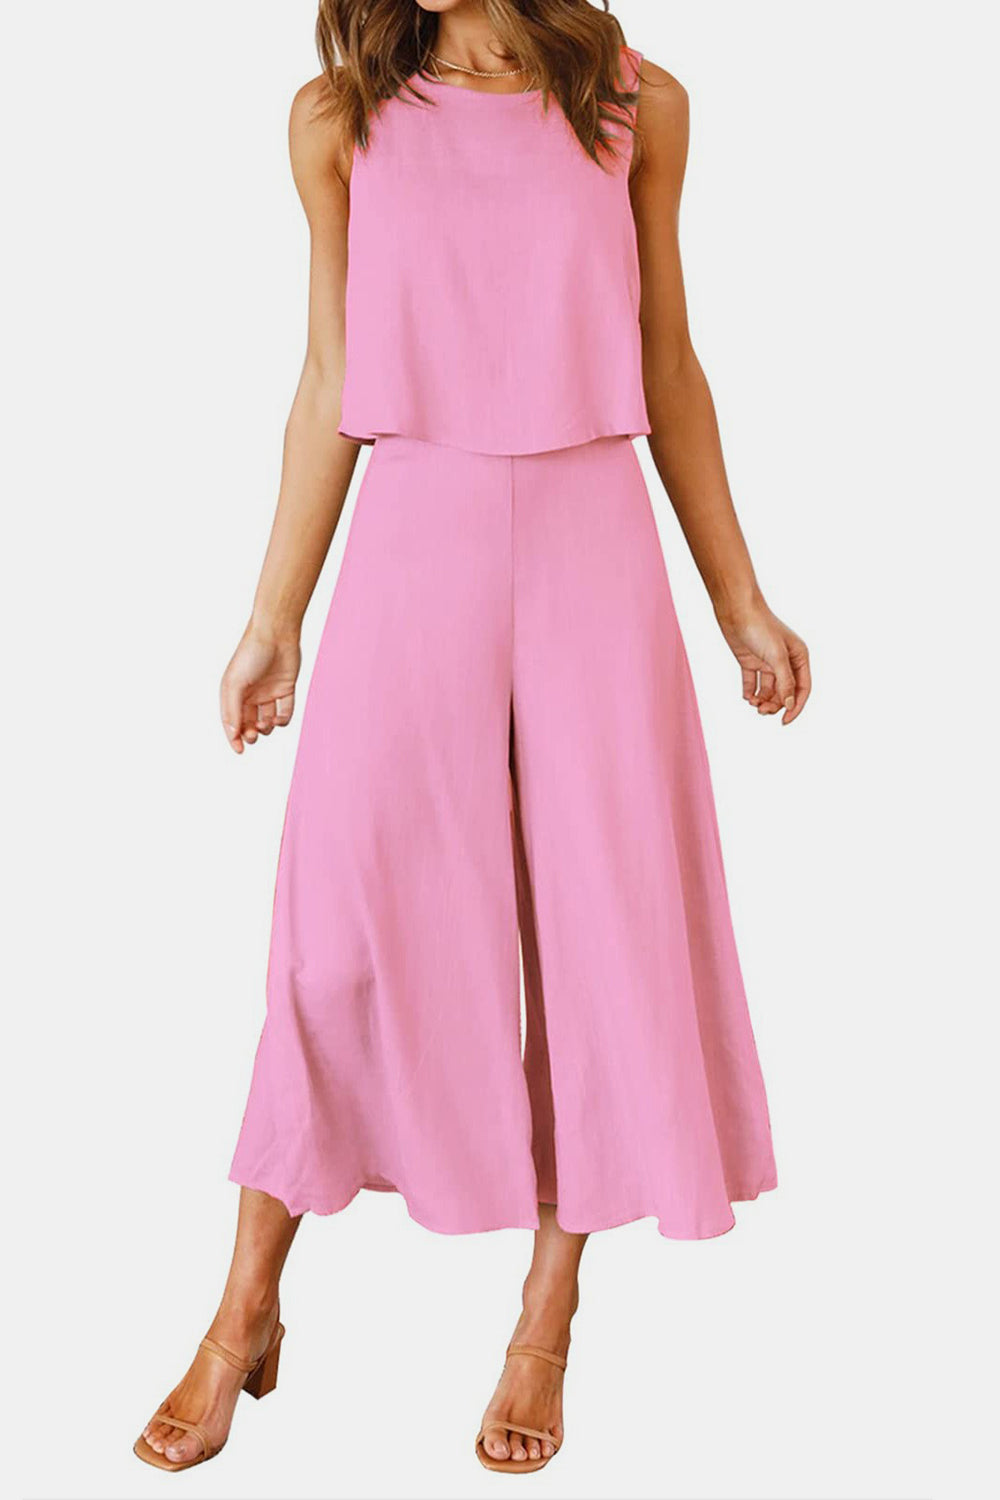 Dusty Pink Culottes Outfit 